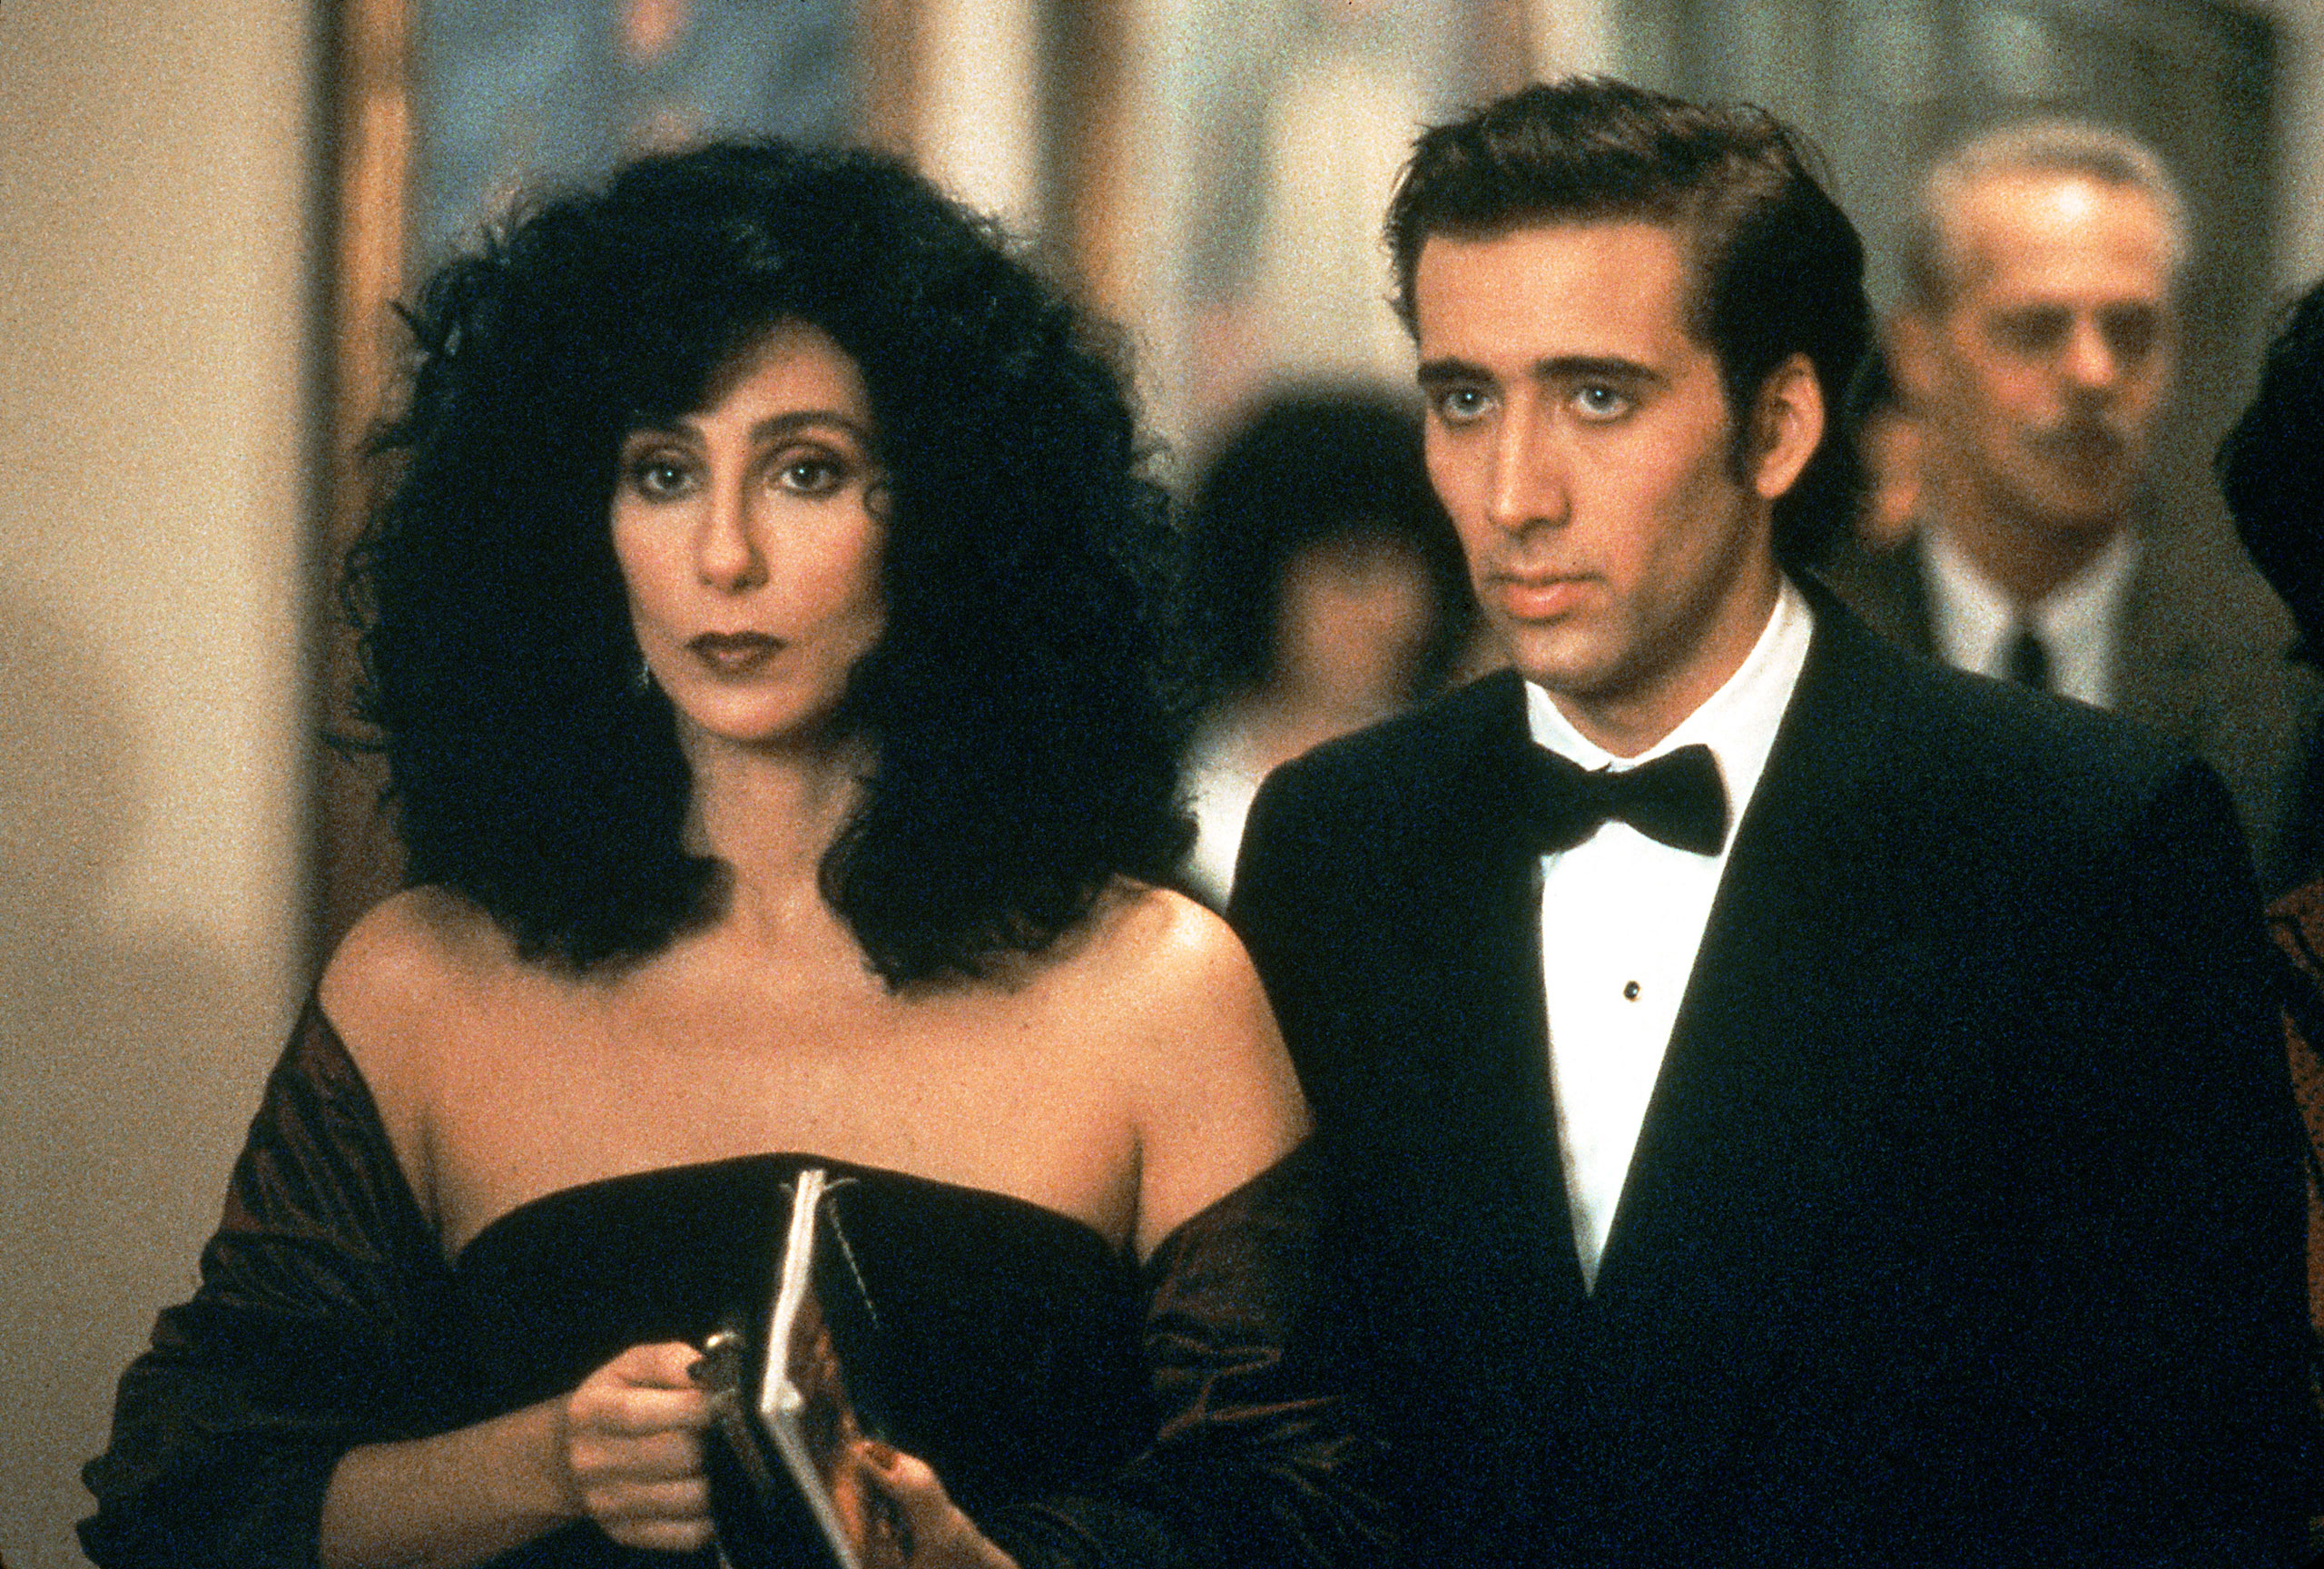 Cher and Nicolas Cage in <i>Moonstruck</i>. (MGM/Everett Collection)